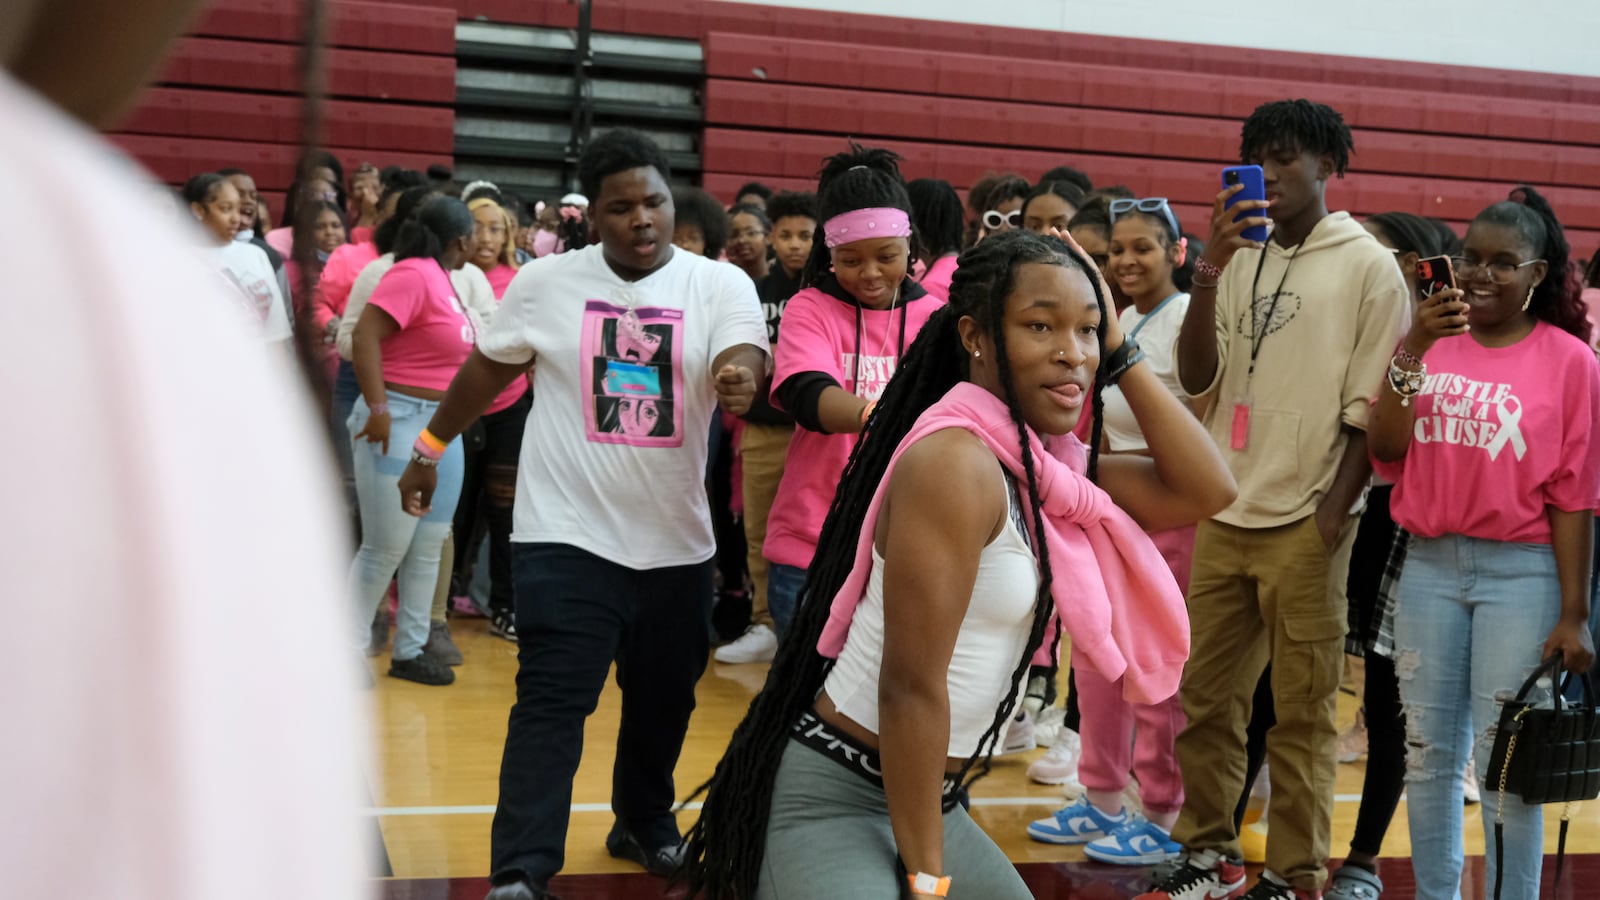 A student wearing a pink sweater around their neck dances in the middle of a circle of students who are filming on their phones and also dancing.